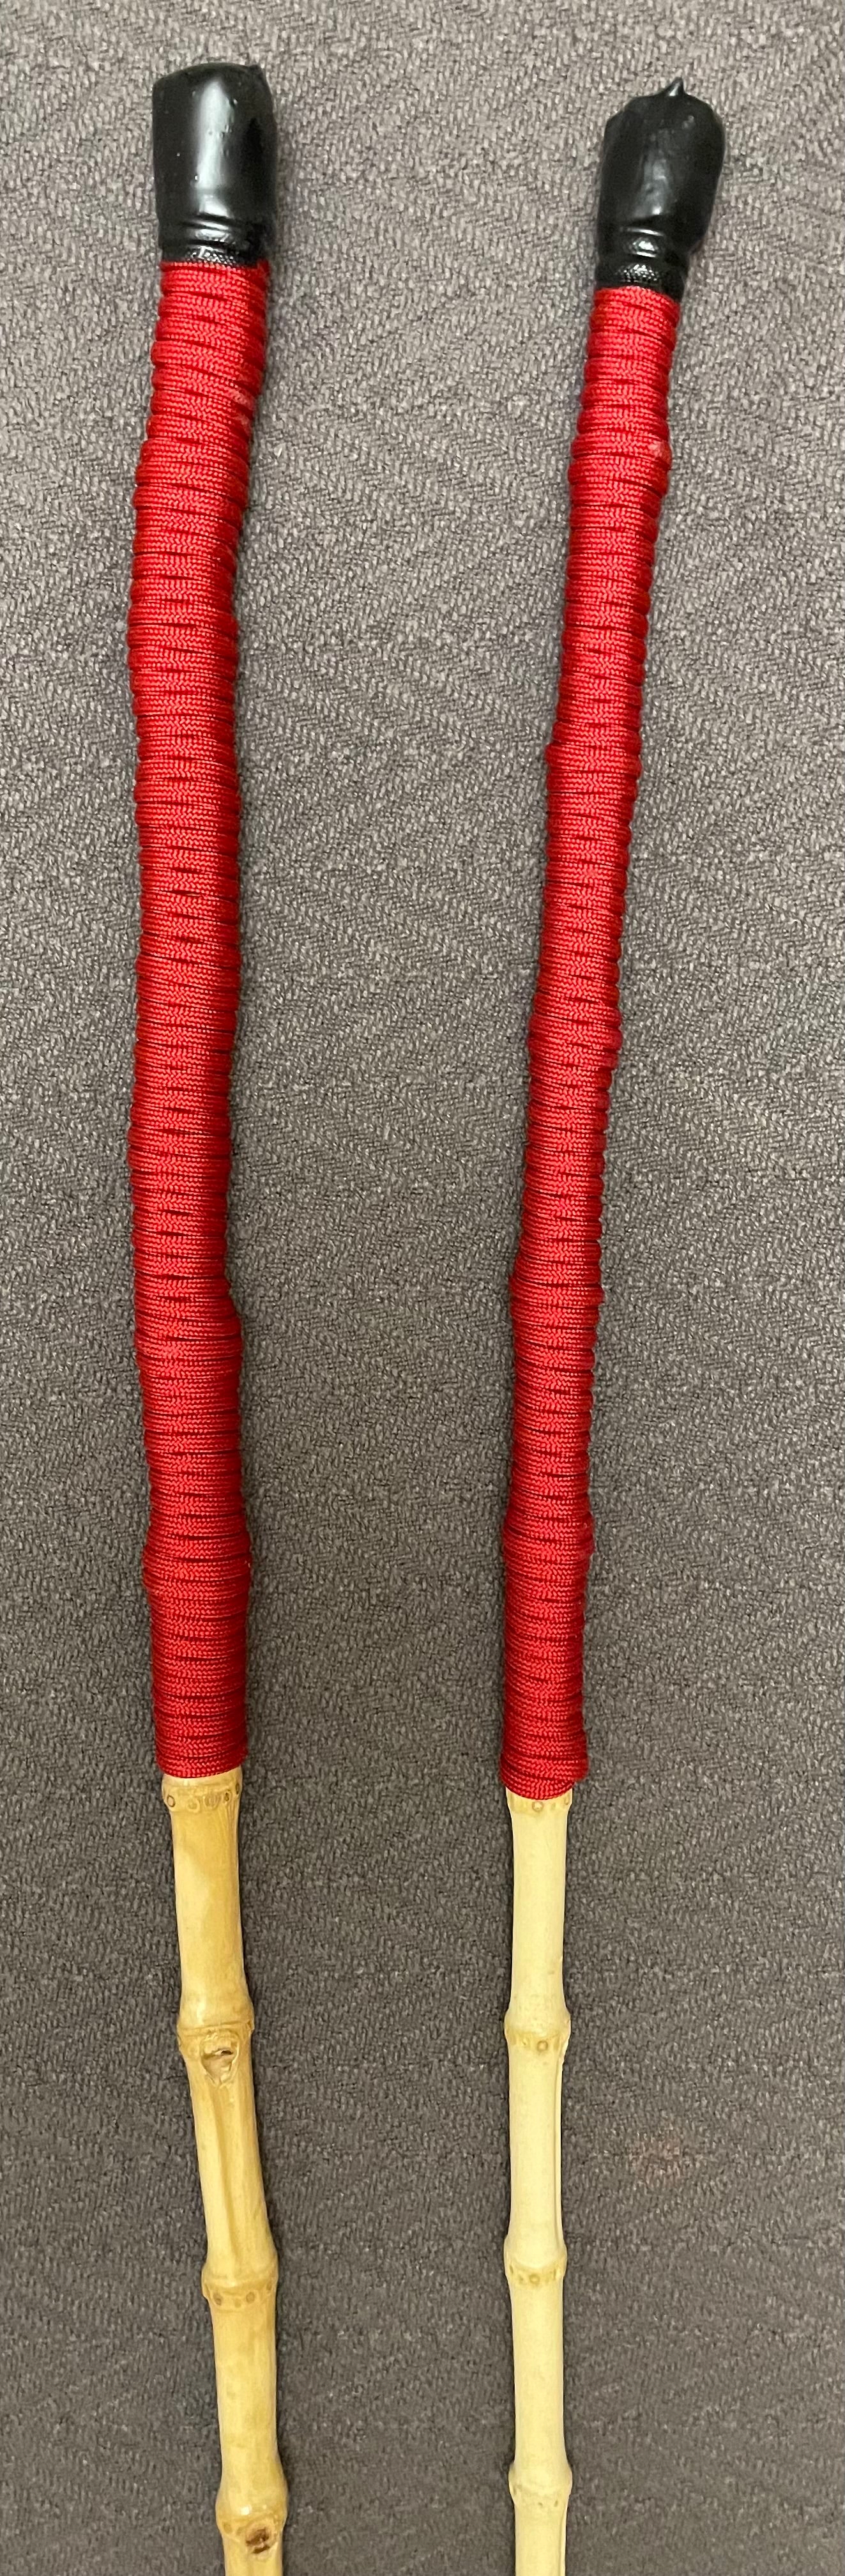 Whangee Punishment Cane (Paracord Handle) - 32 - 35" Length & 9-11mm OR 12-14mm Thickness